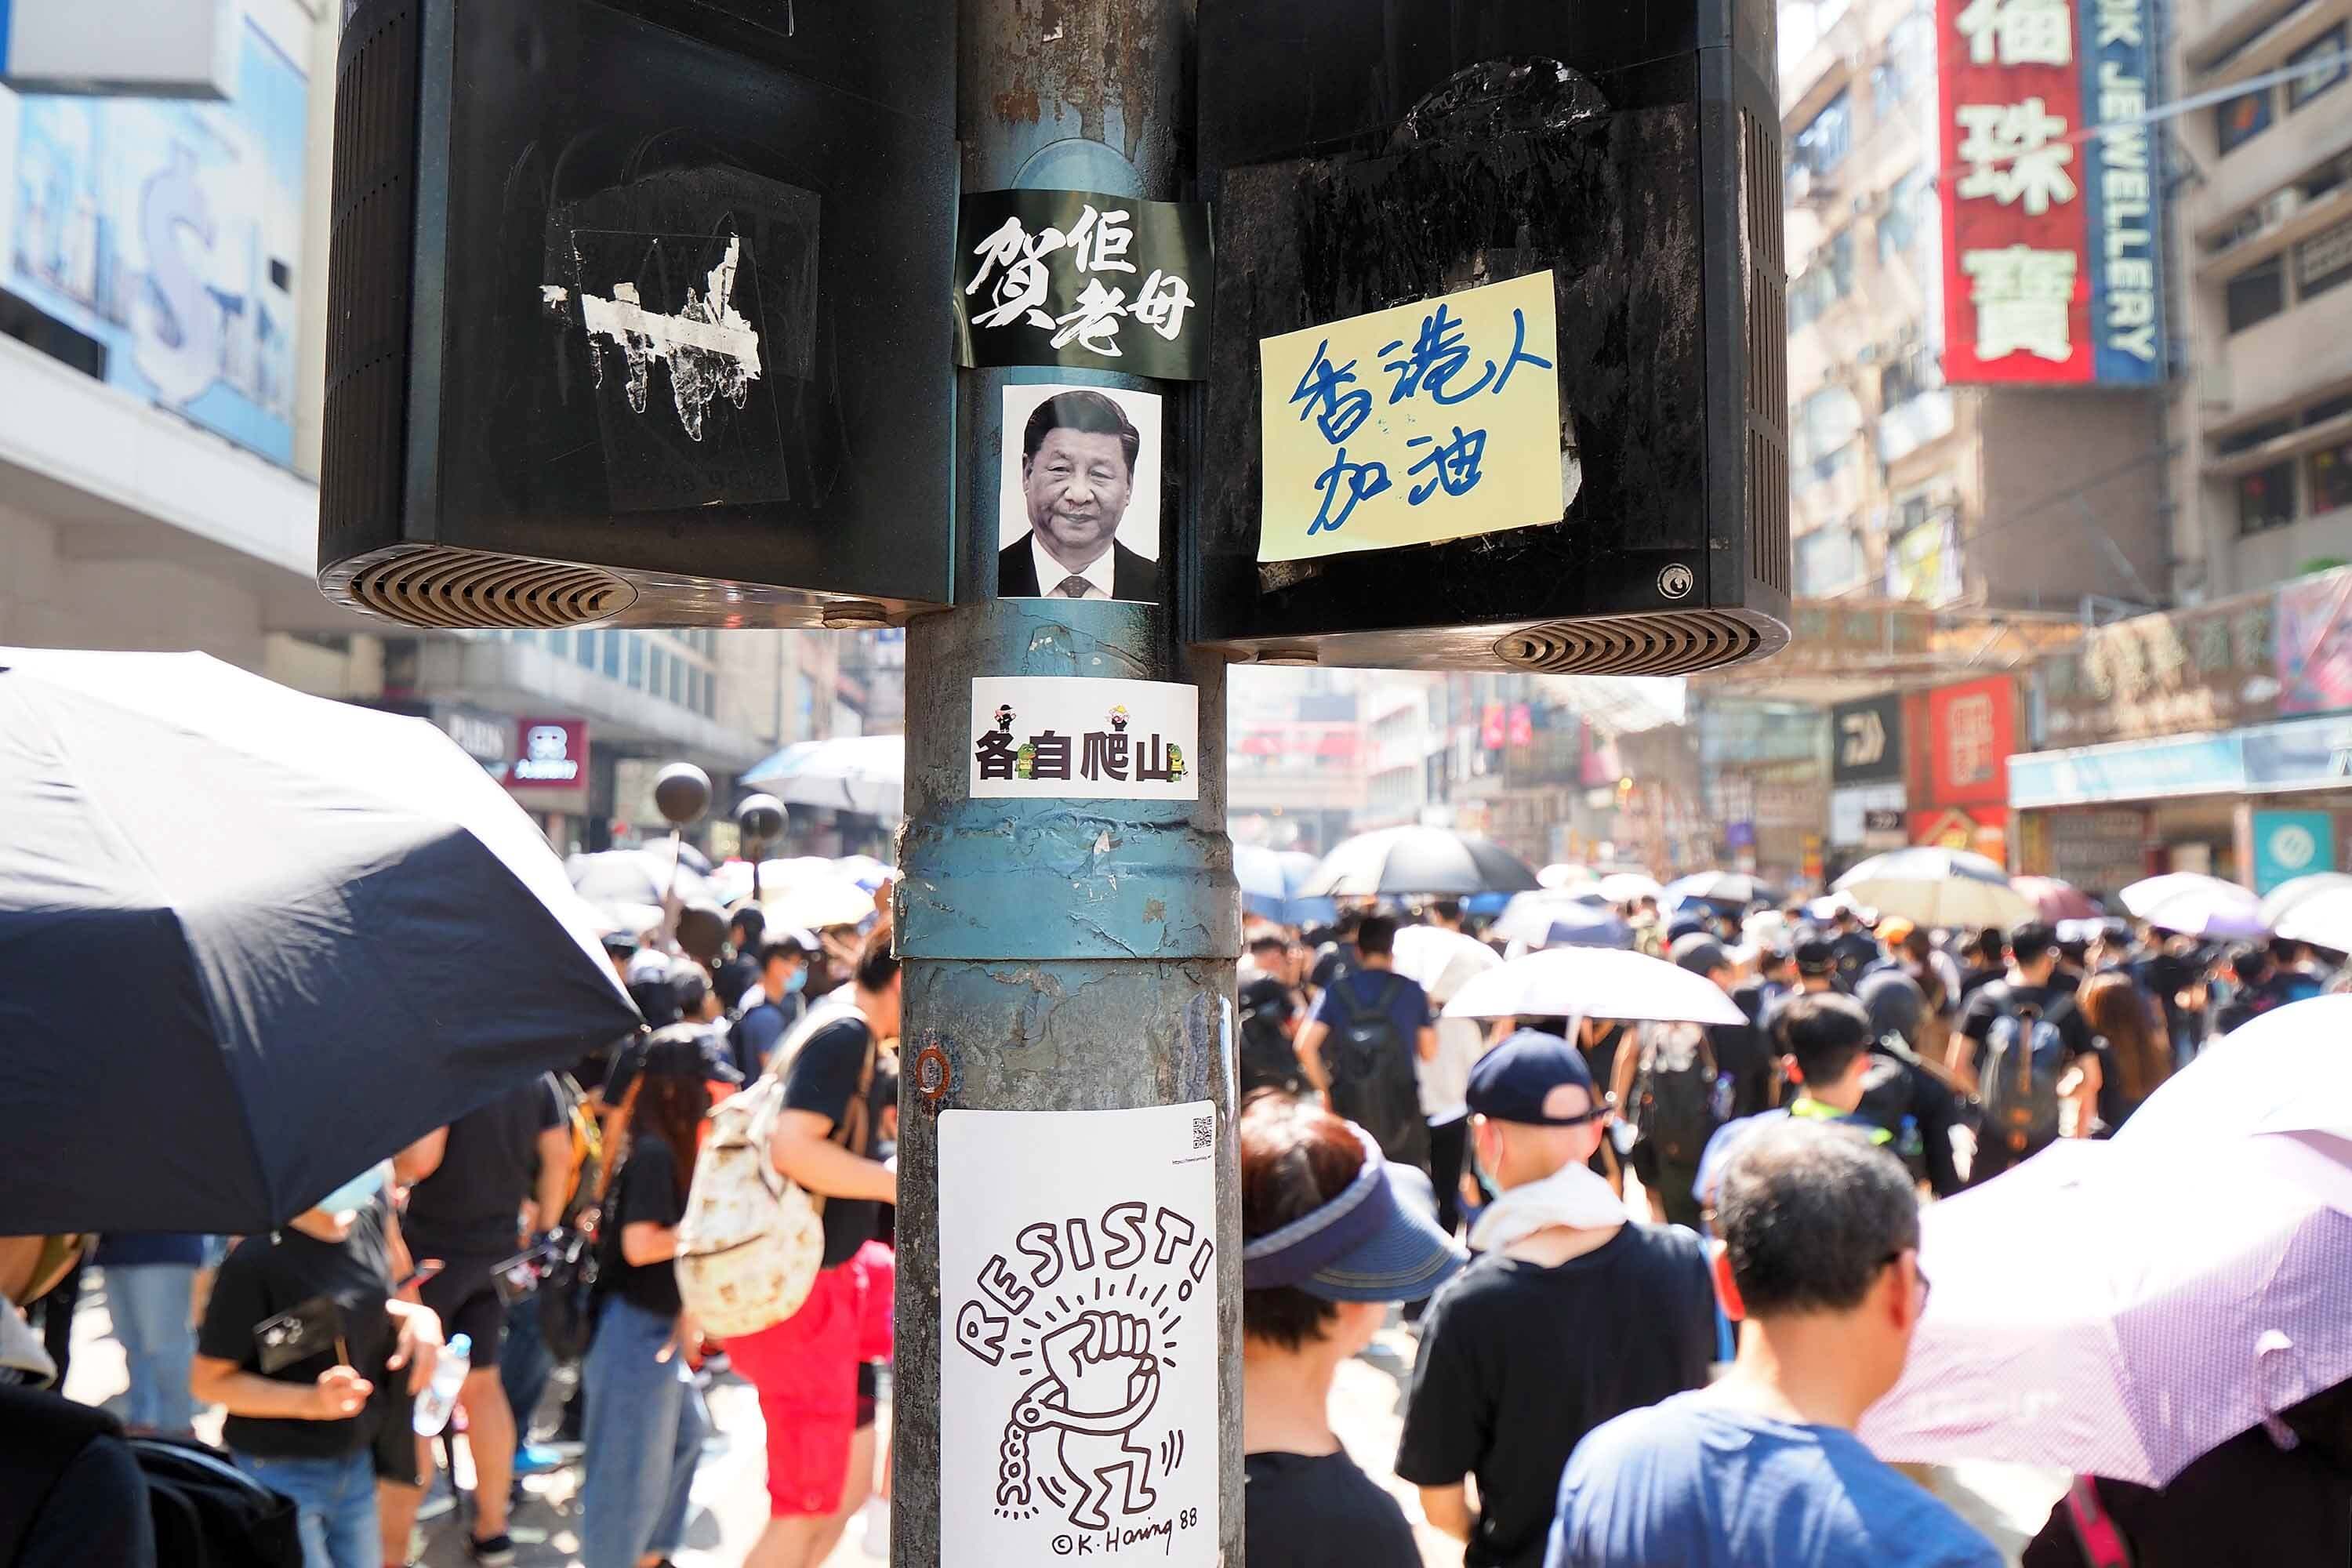 Dams-Banners protesting the Chinese government at a protest in Hongkong, 1 October 2019. © Etan Liam - Flickr